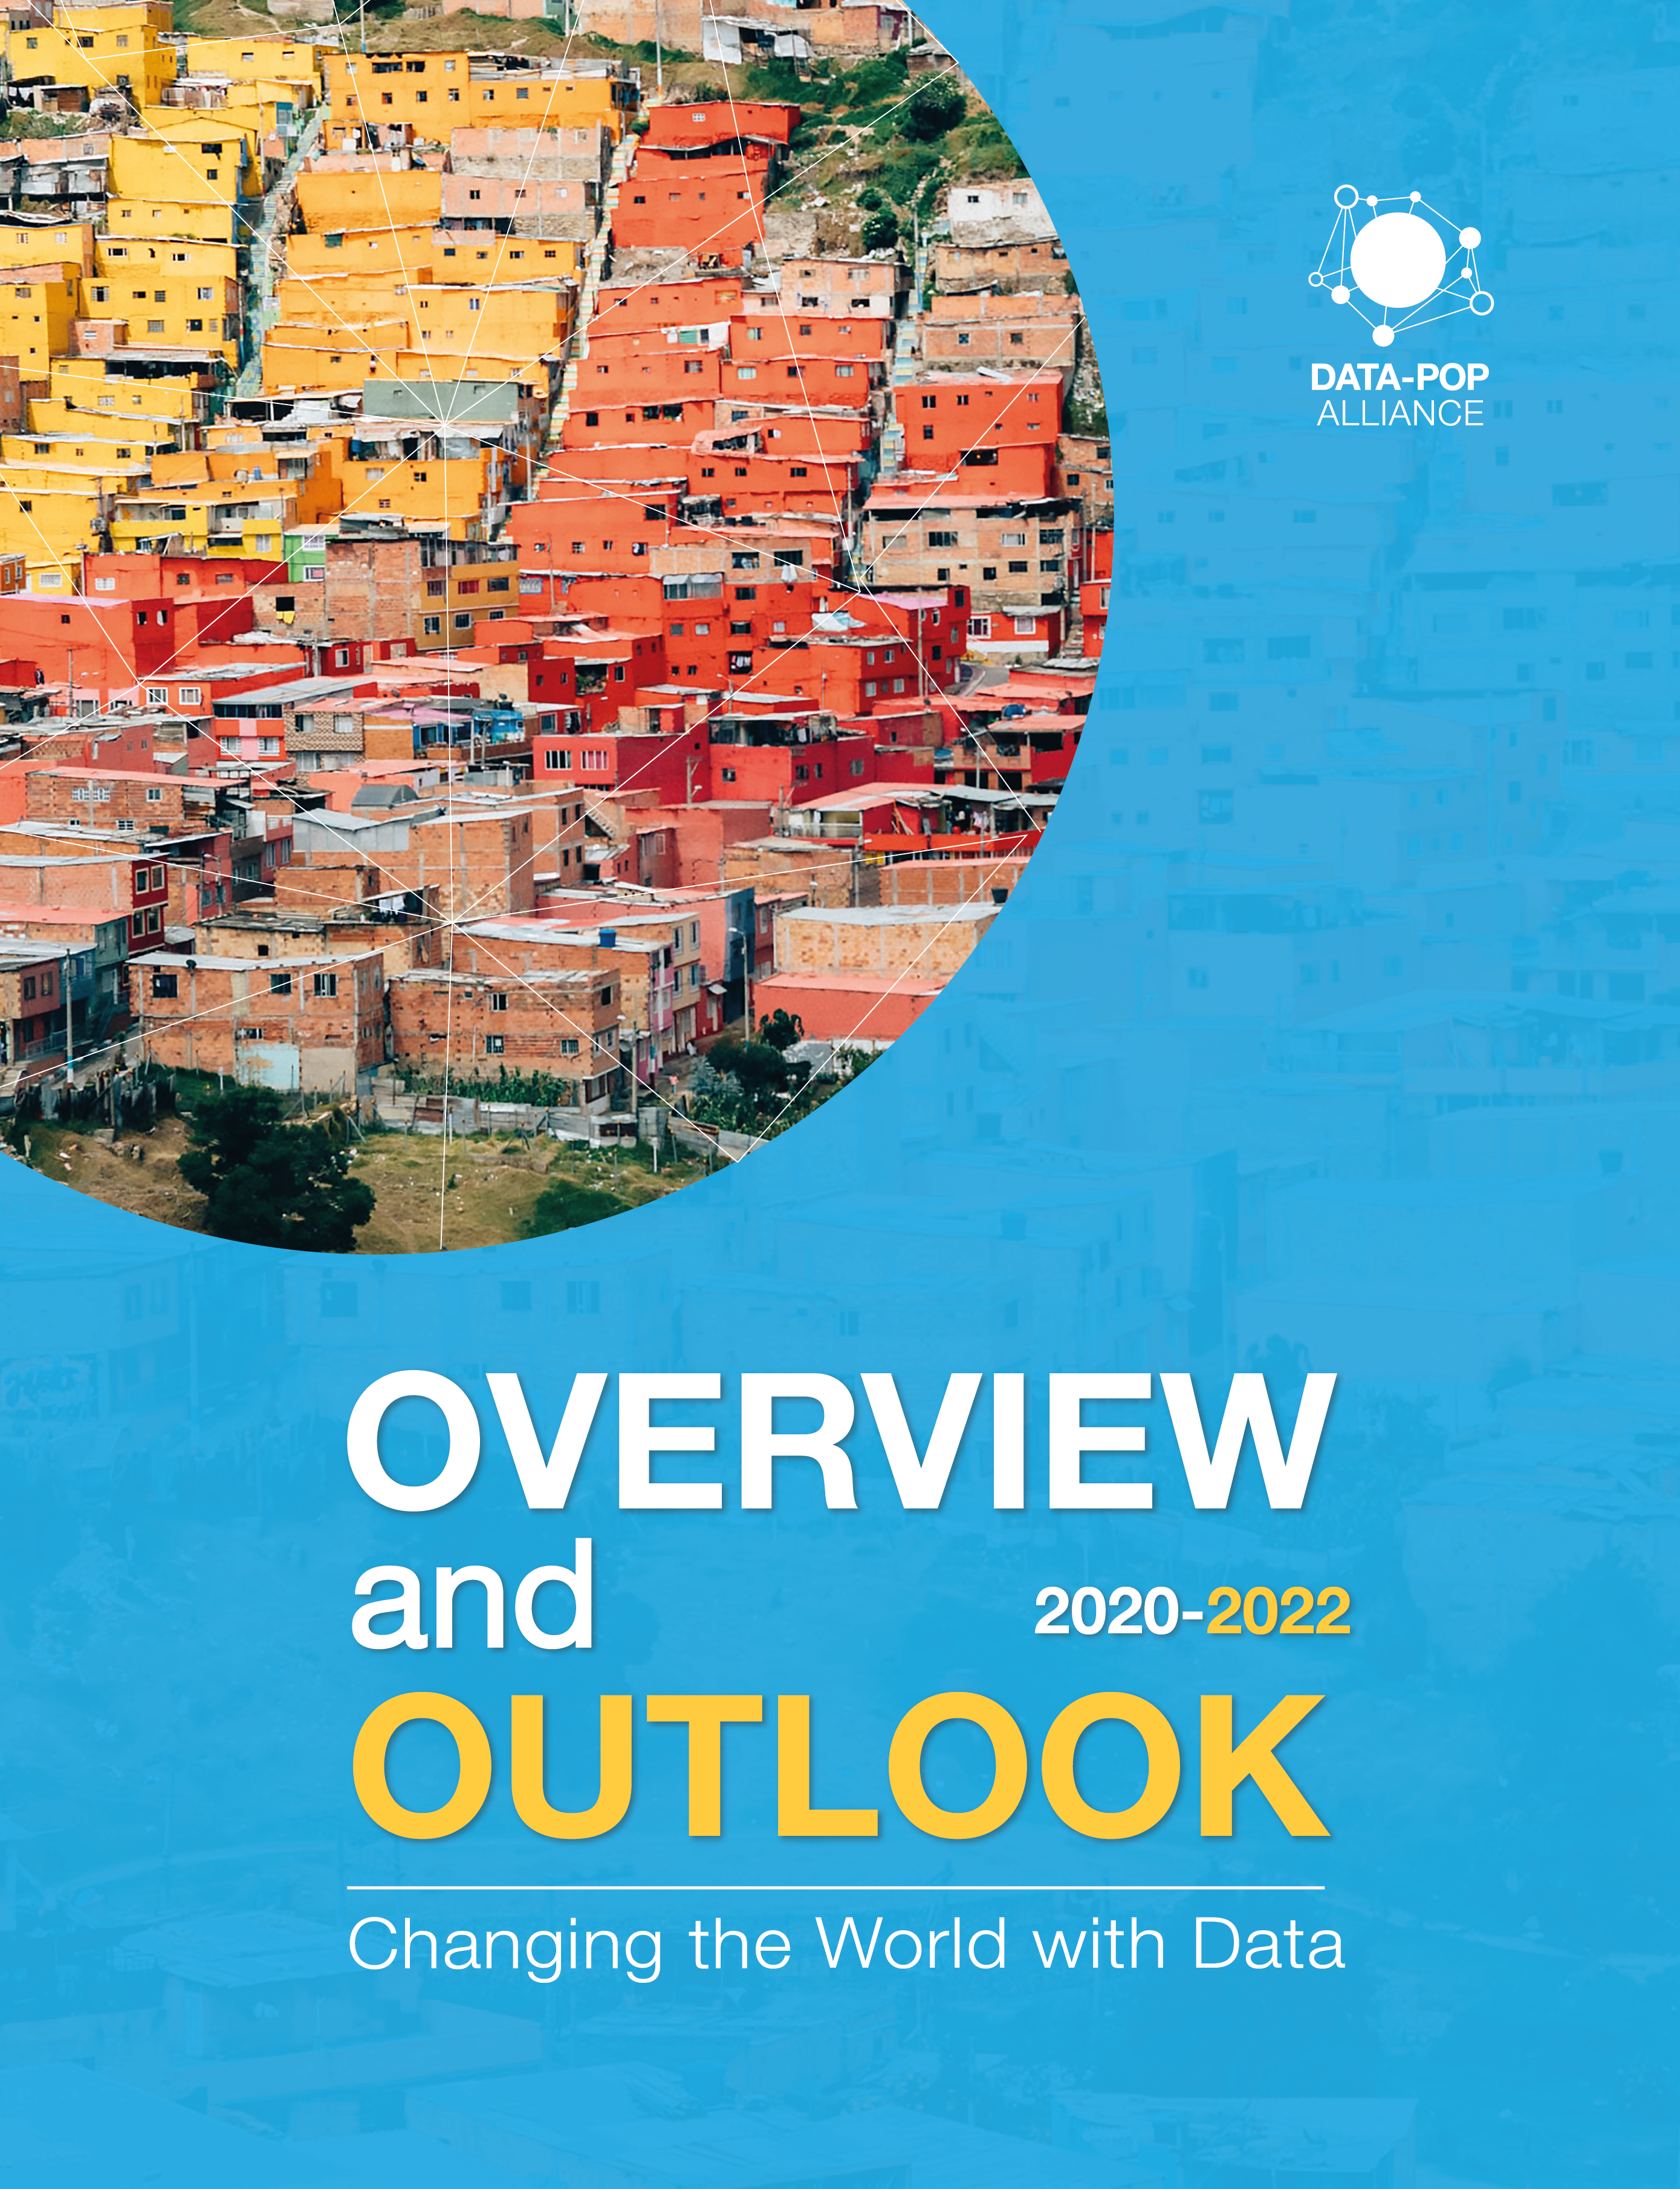 Overview and Outlook 2020-2022